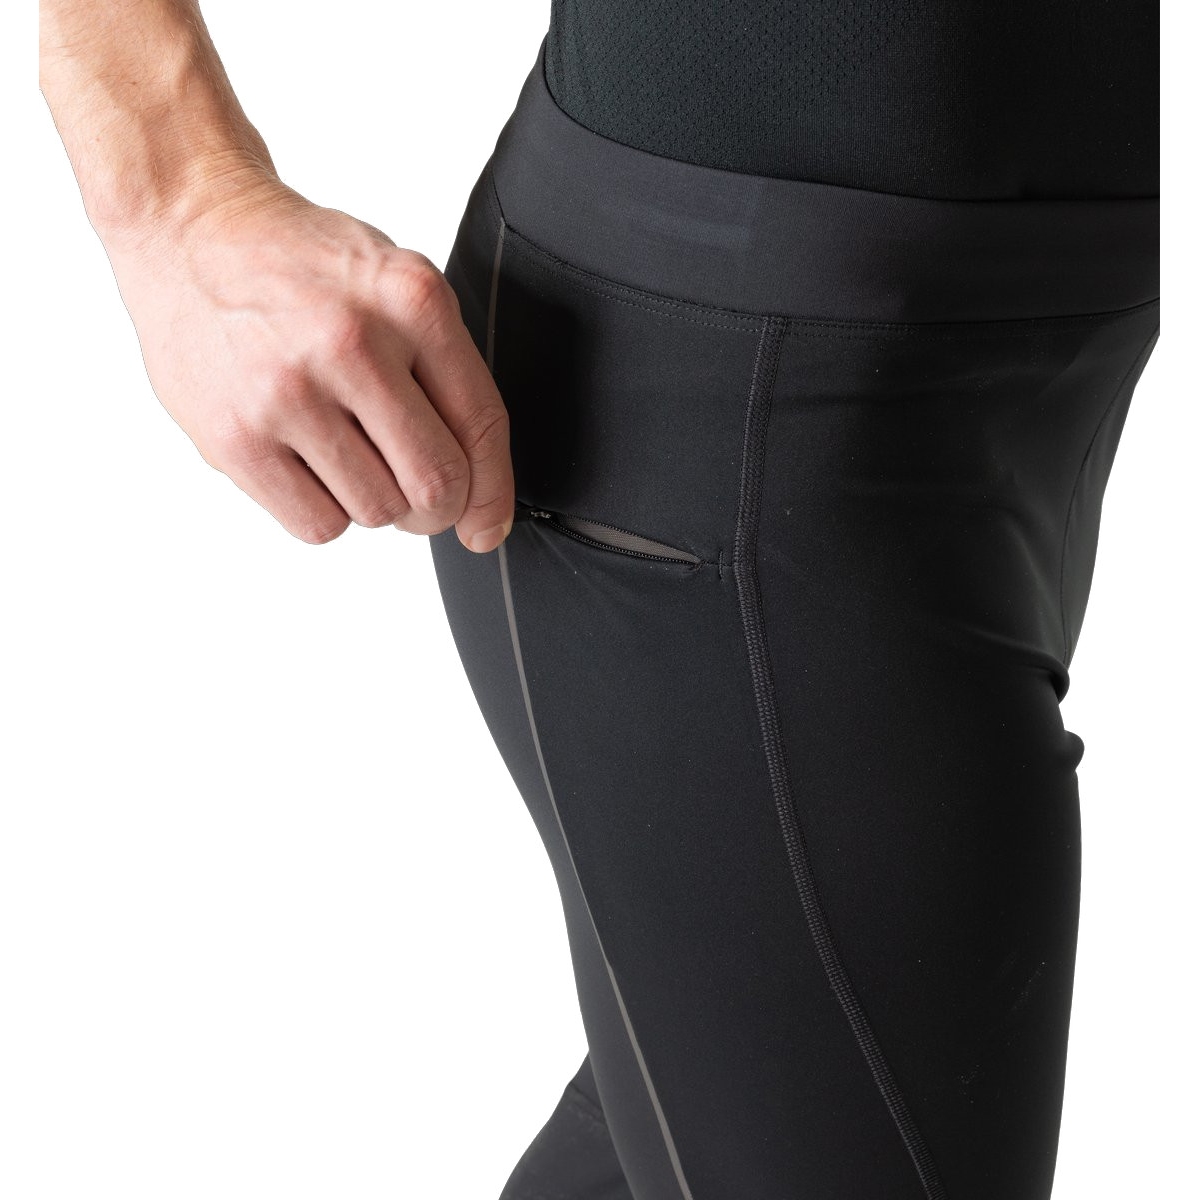 Odlo Tights Zeroweight Warm Reflective - Running tights Men's, Product  Review